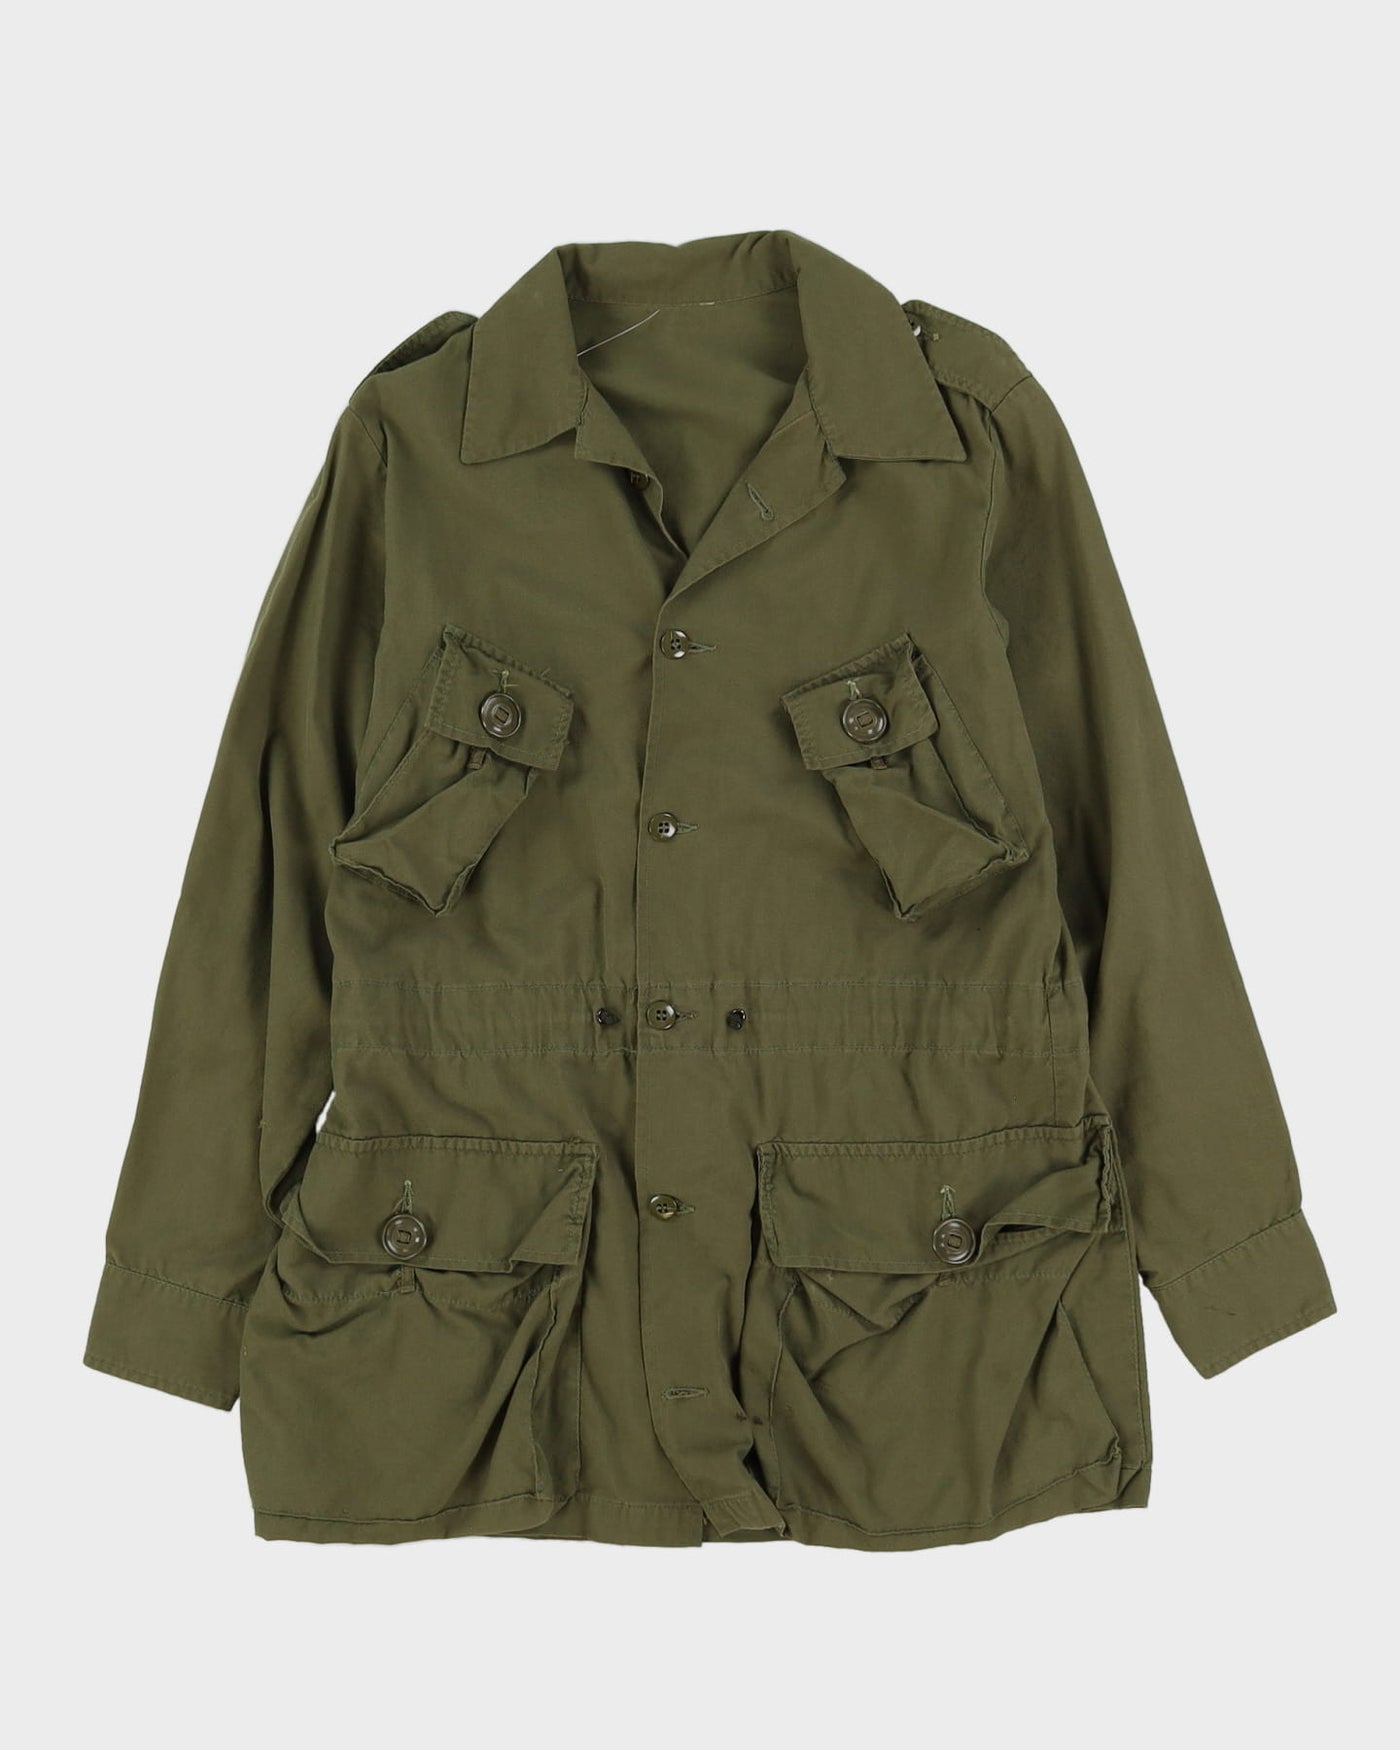 90s VIntage Canadian Army Lightweight Combat Coat - Small